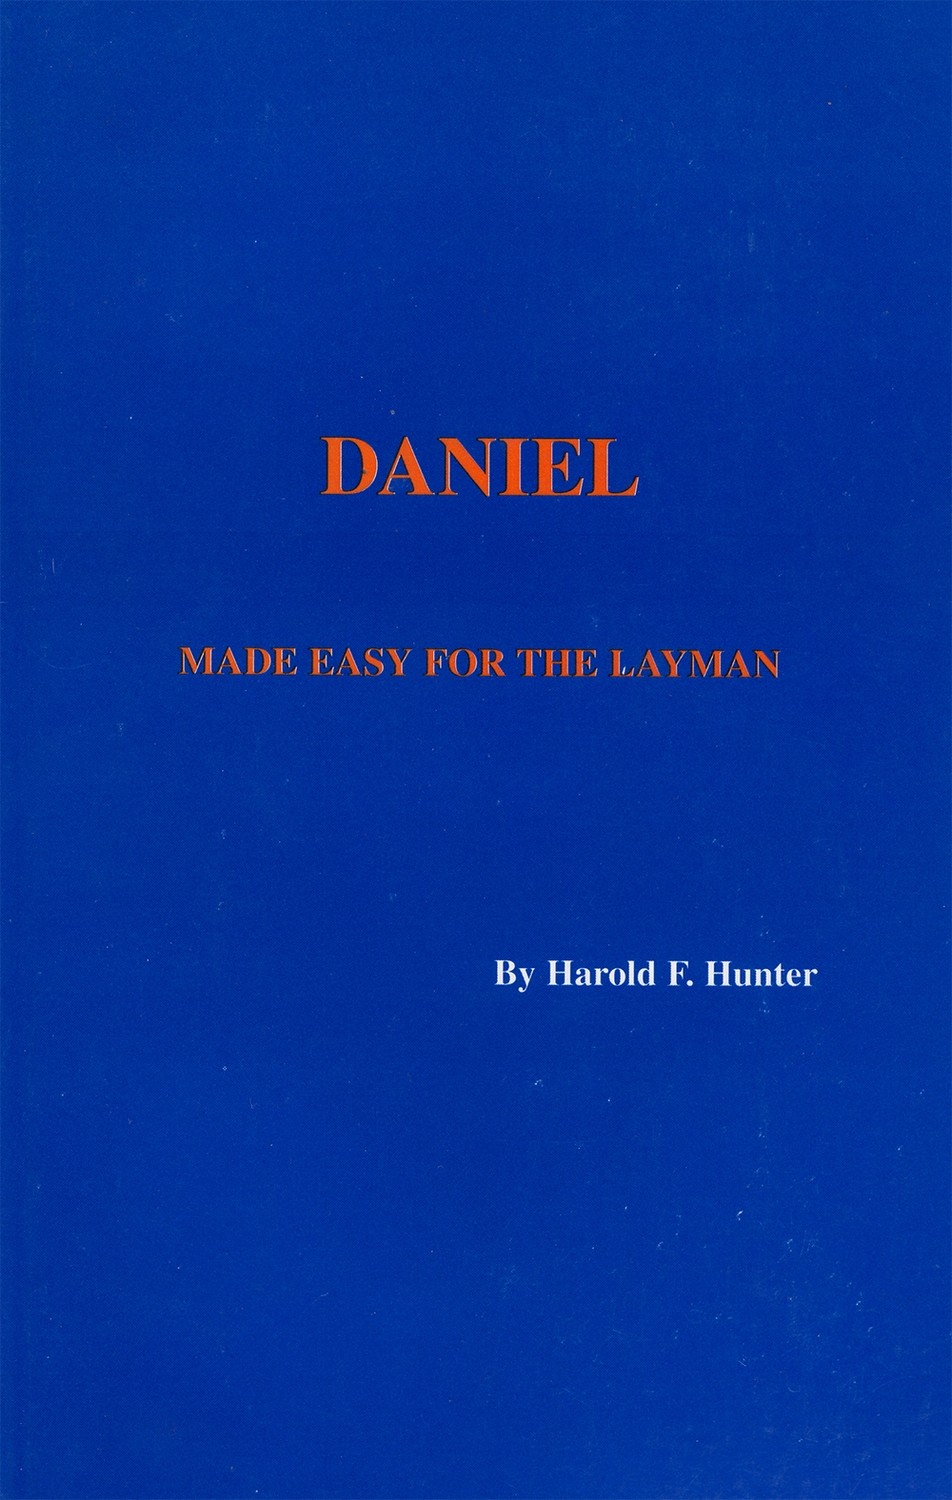 Daniel: Made Easy For The Layman by Dr. Harold Hunter, Ph.D.